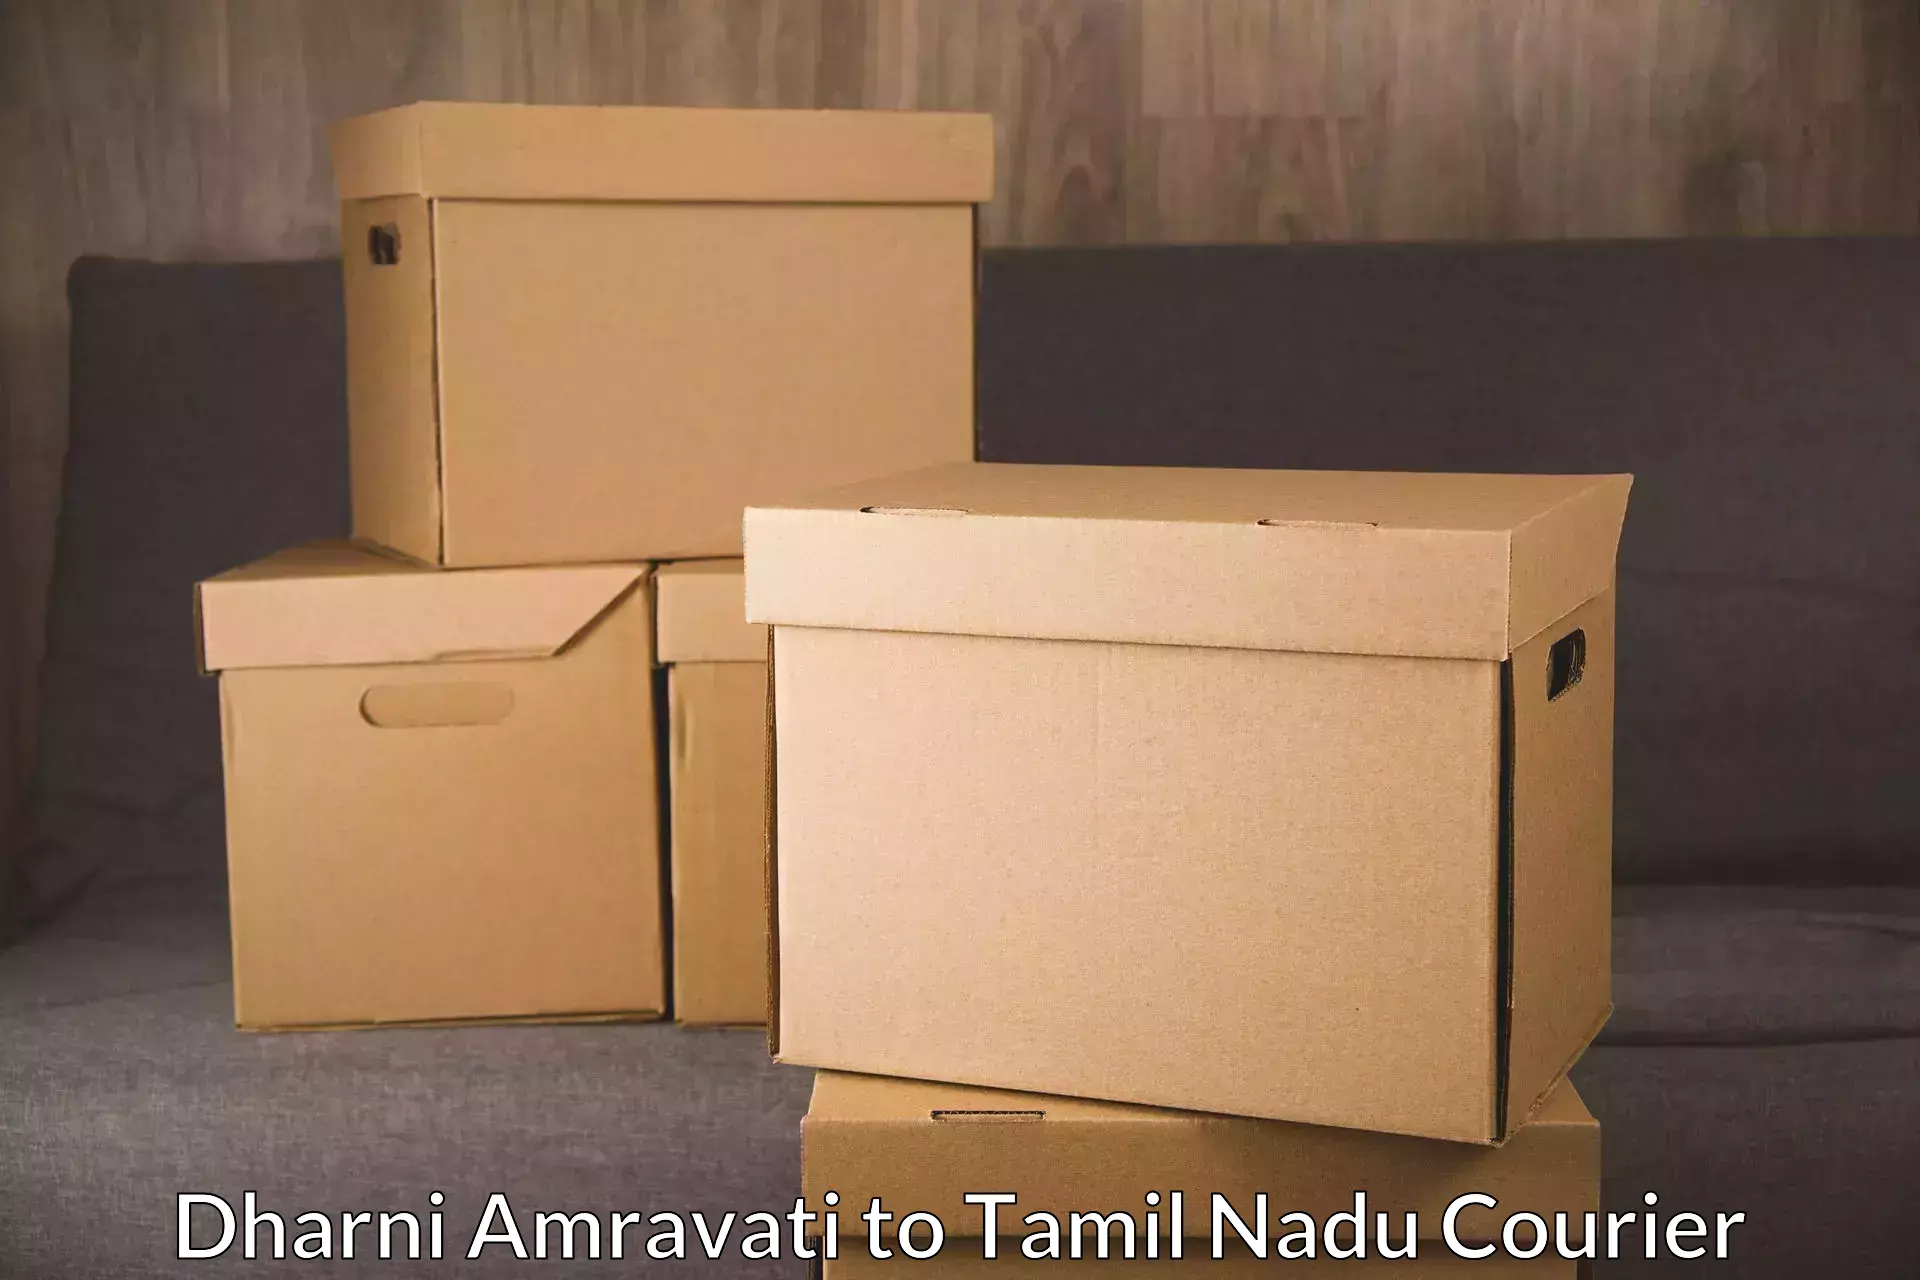 Reliable courier services Dharni Amravati to Ennore Port Chennai